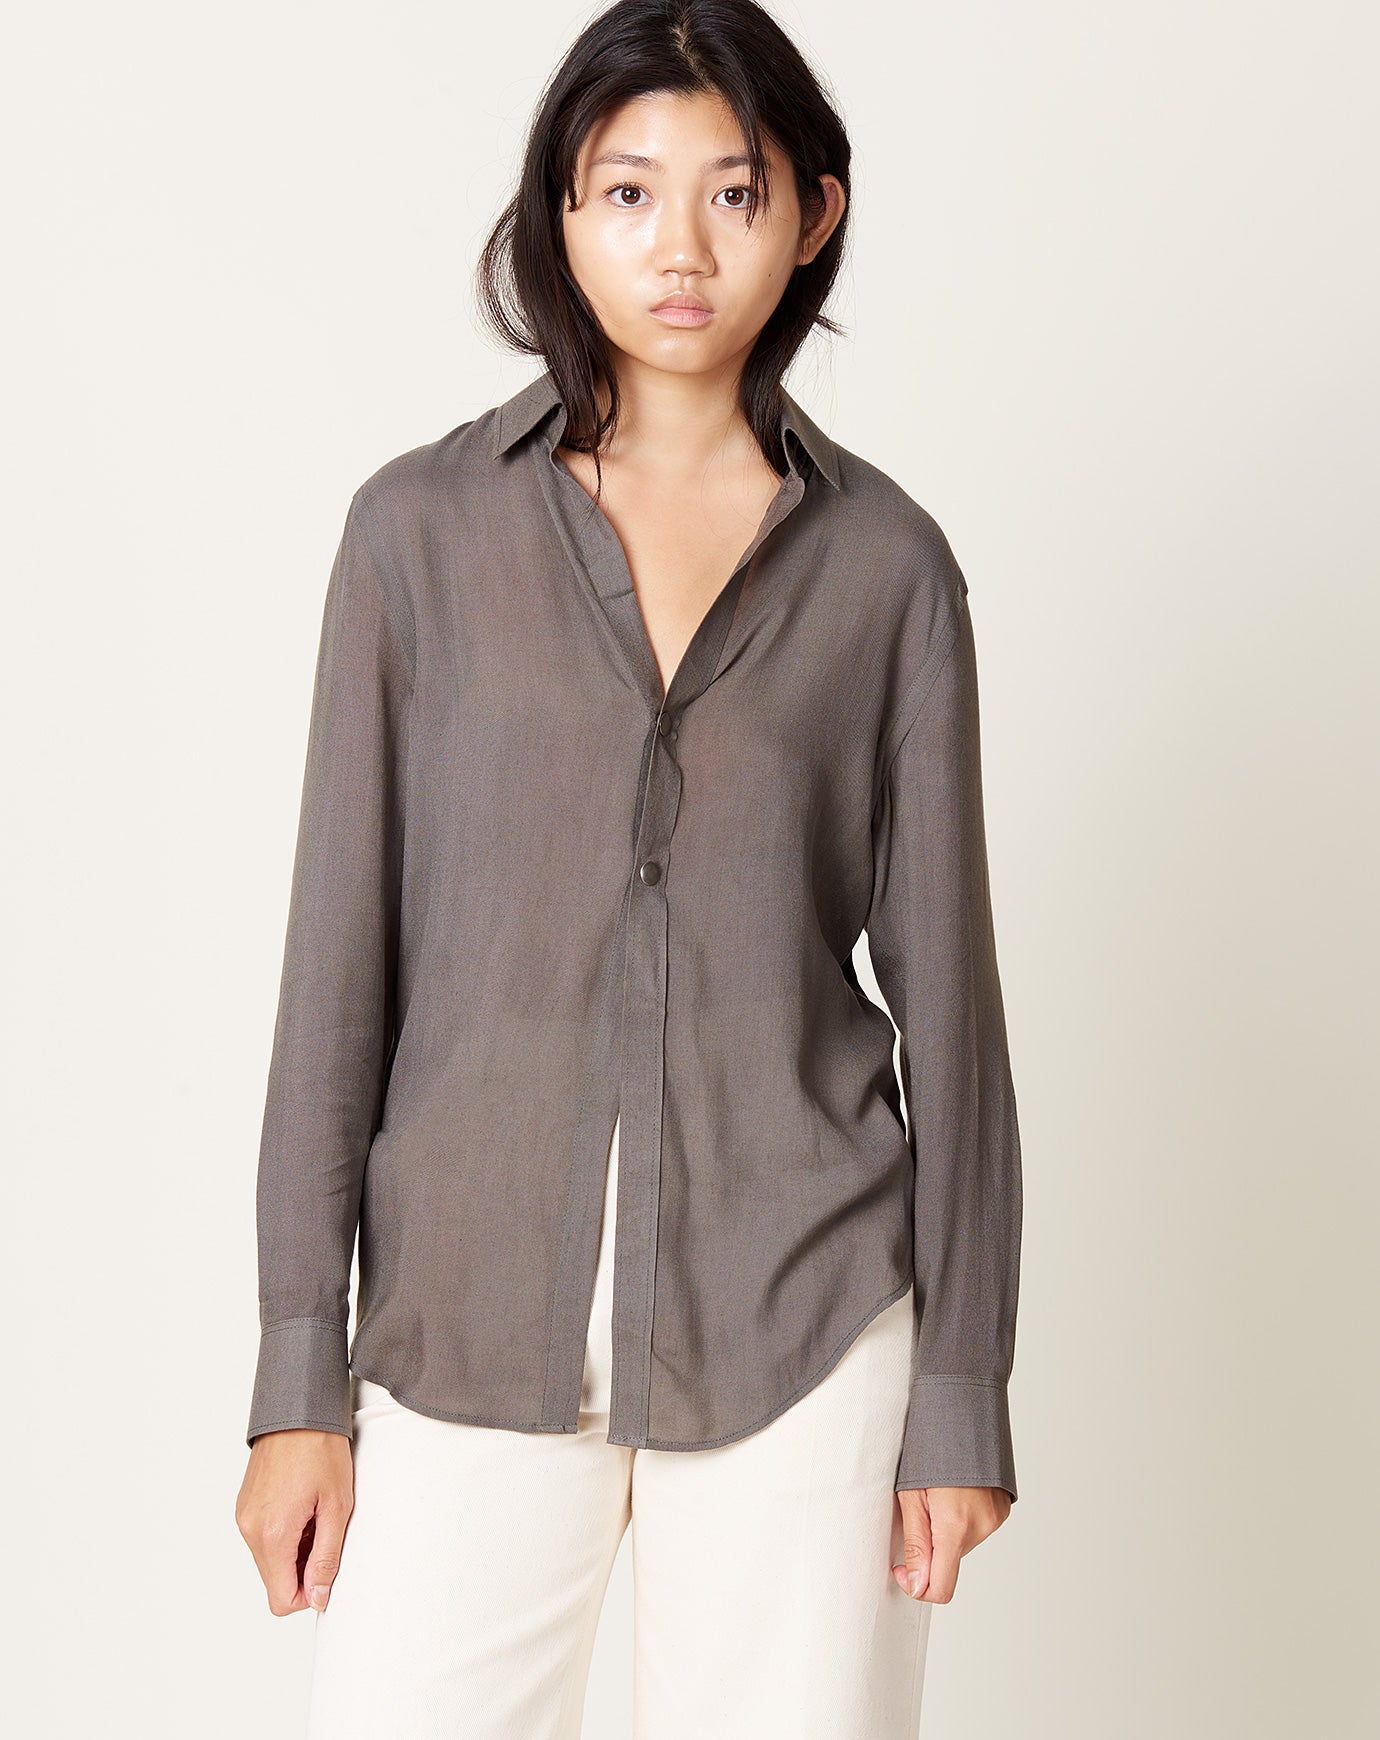 Frenckenberger Fitted Woven Shirt in Black Olive